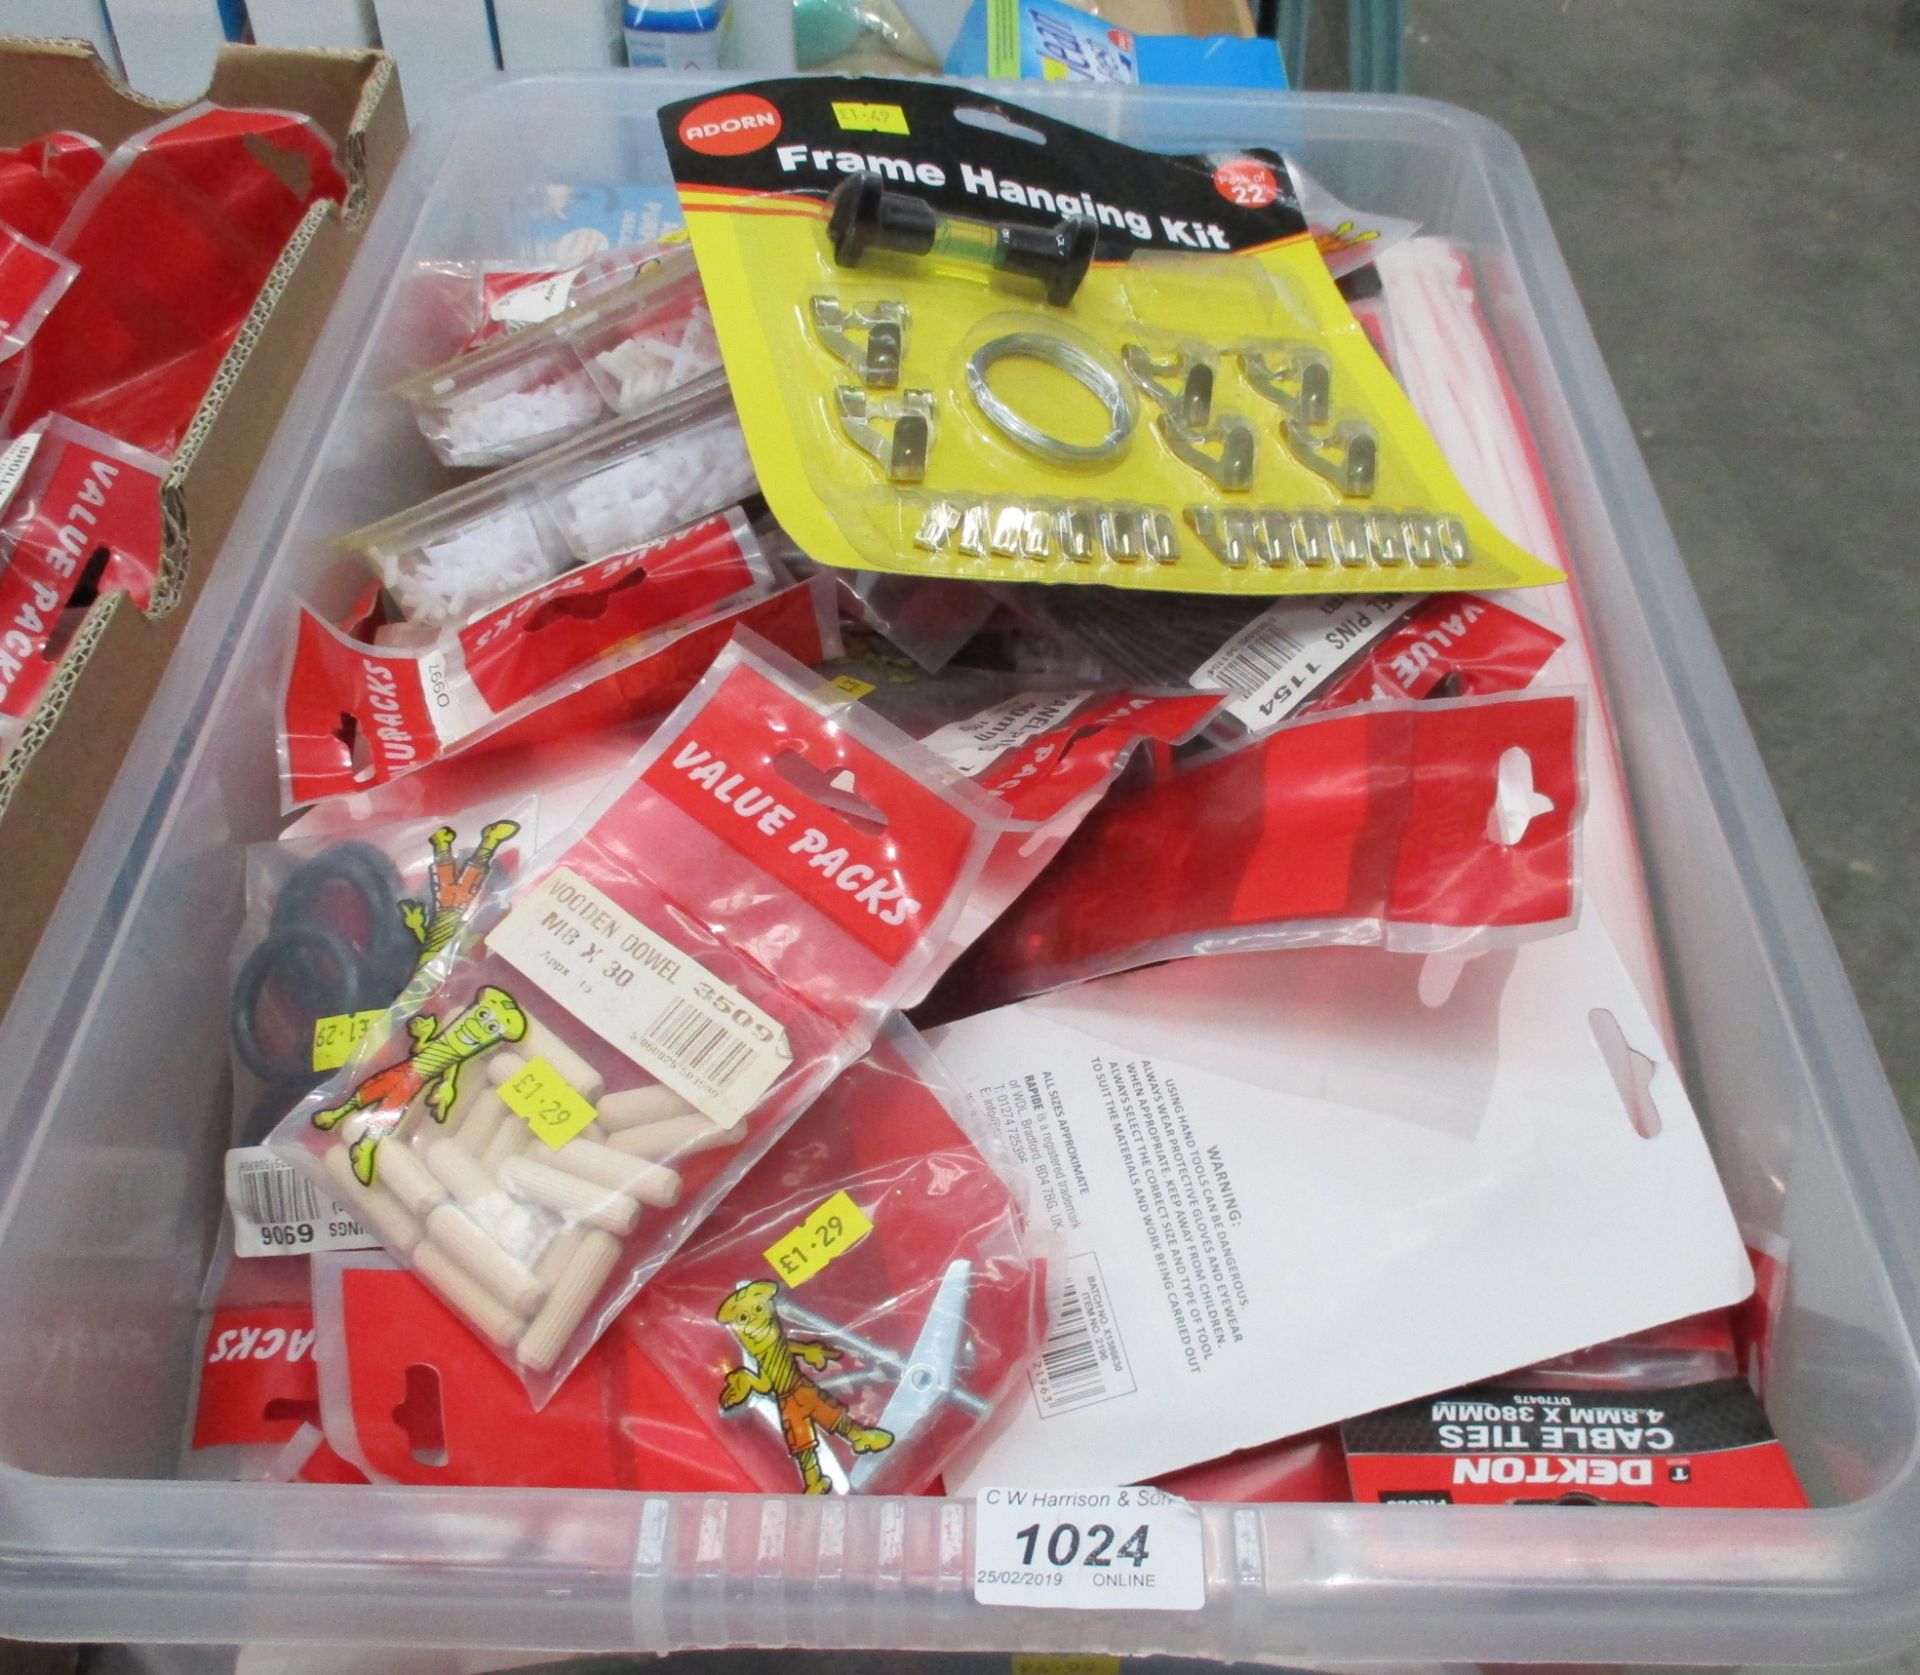 Approximately 100 x items - packs of frame hanging kits, packs of plasterboard fixings and screws,